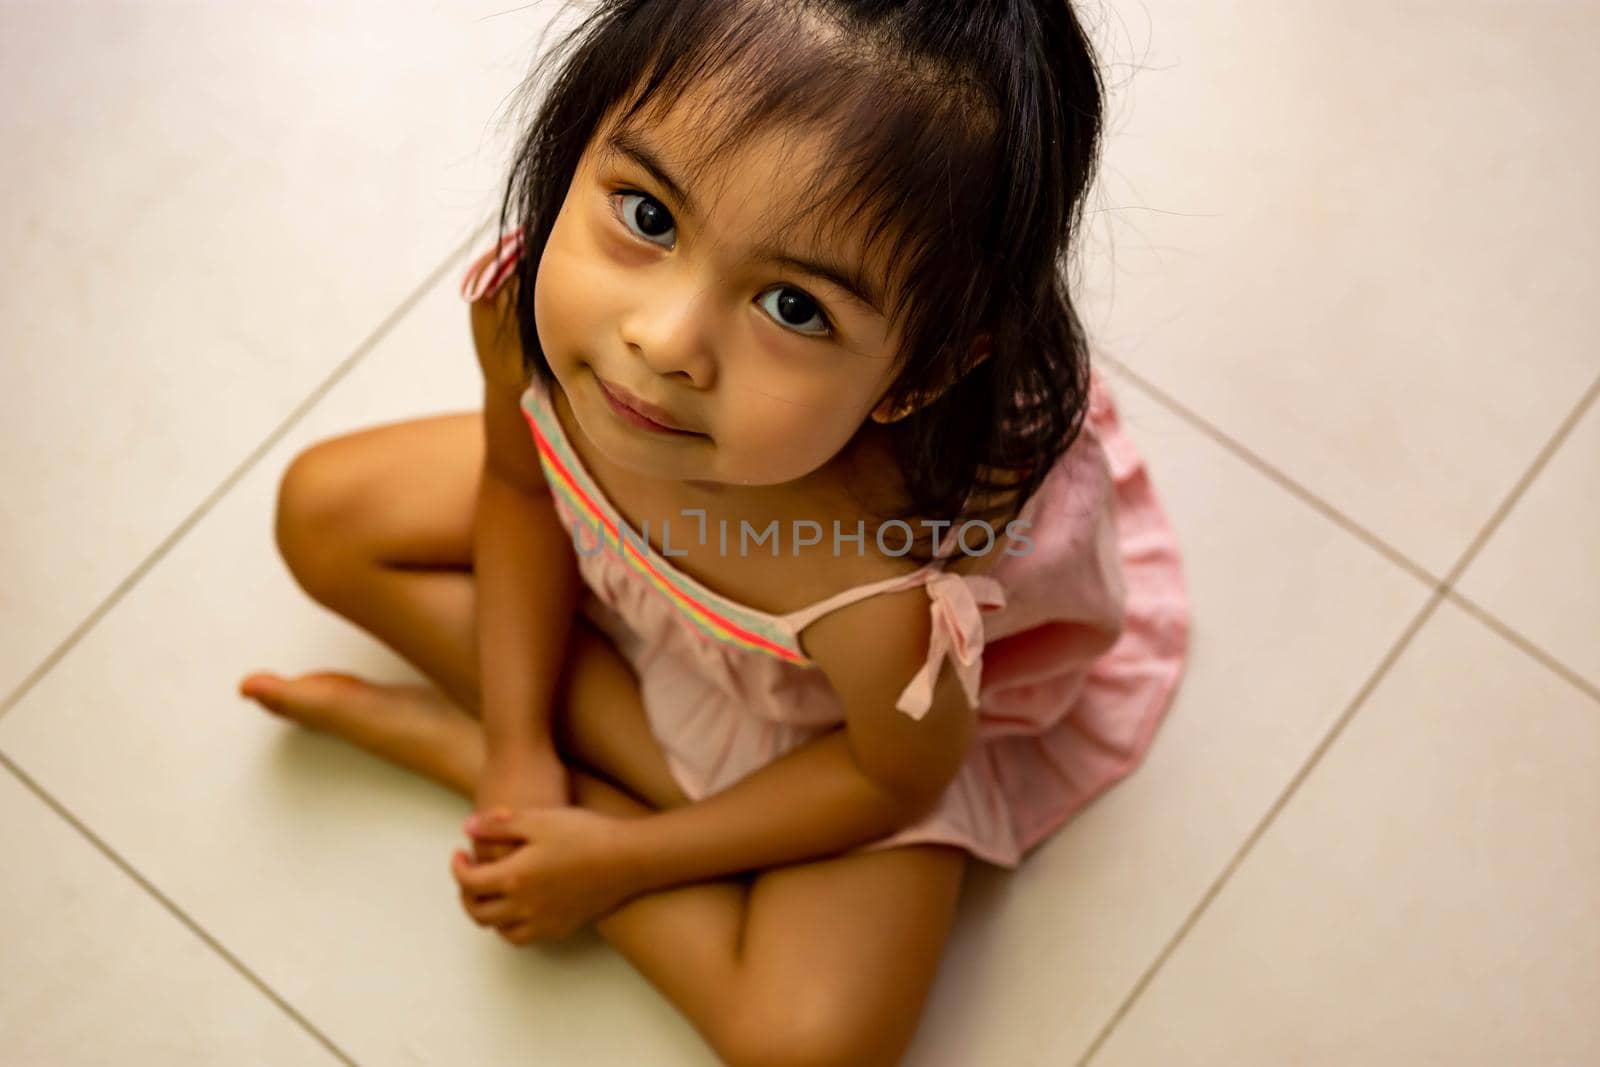 Cute little asian girl sitting on a floor and looking up